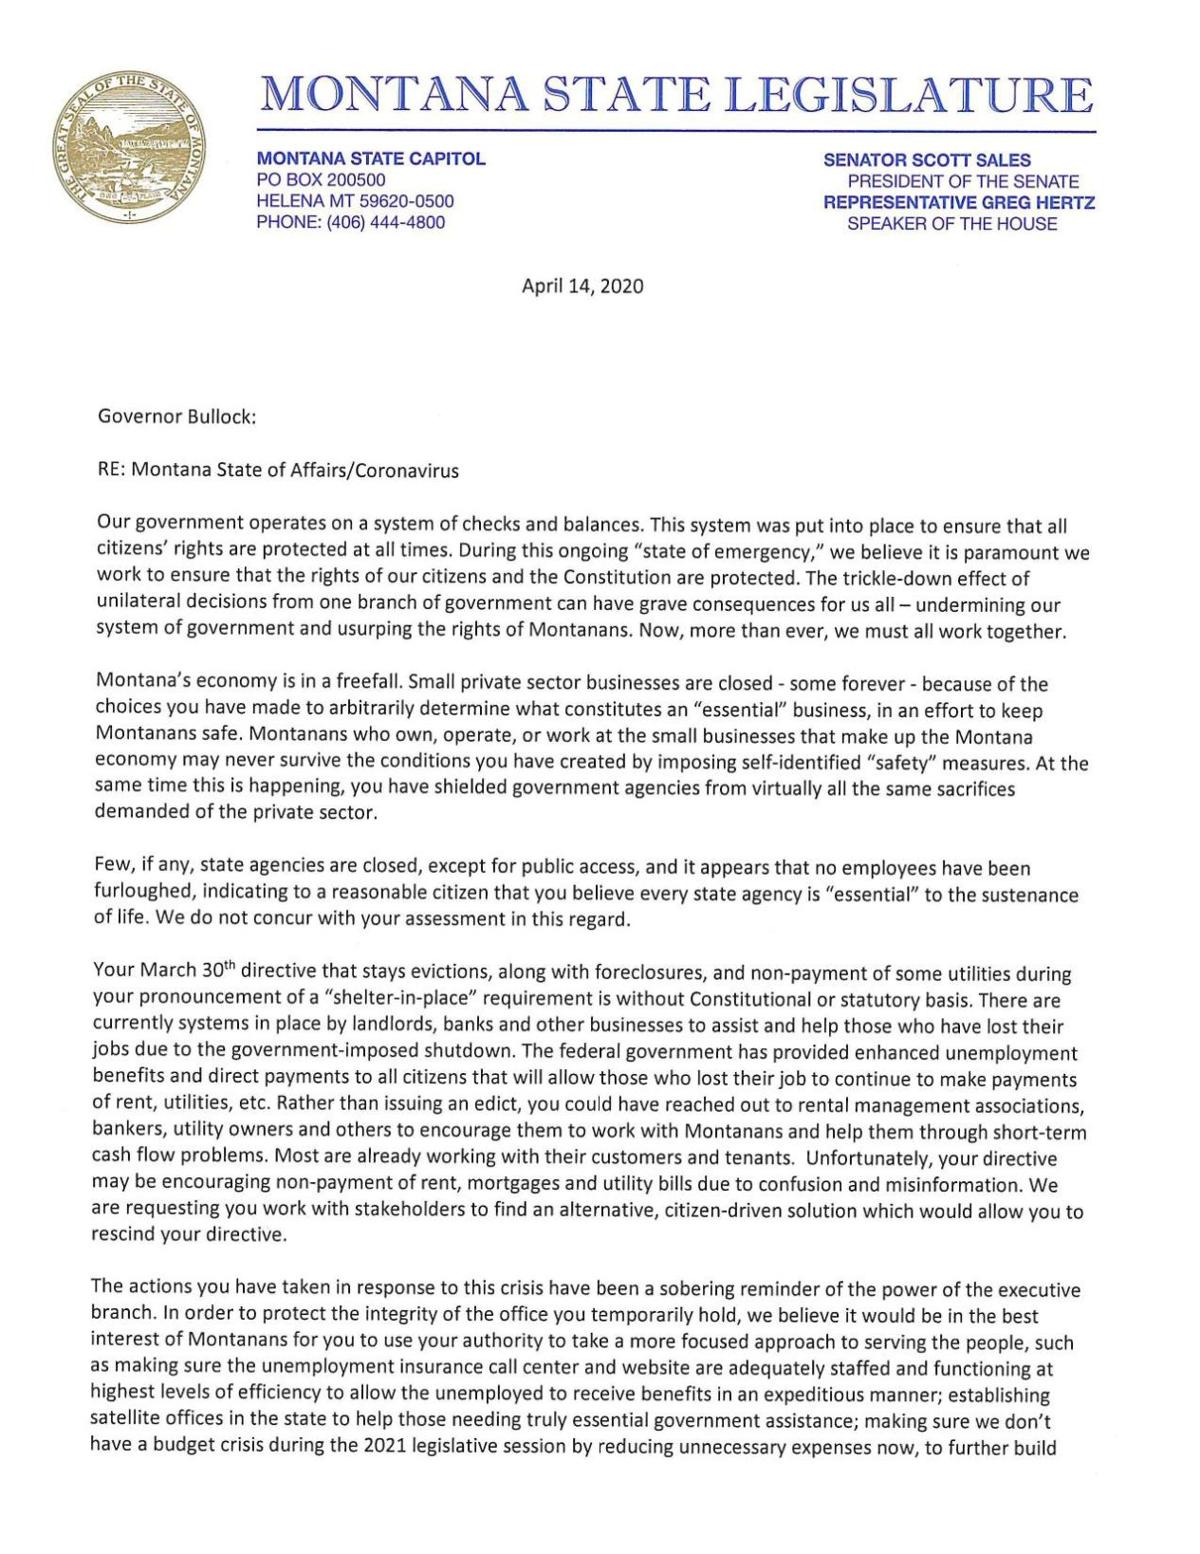 MT congress members write letter to gov. voicing COVID-23